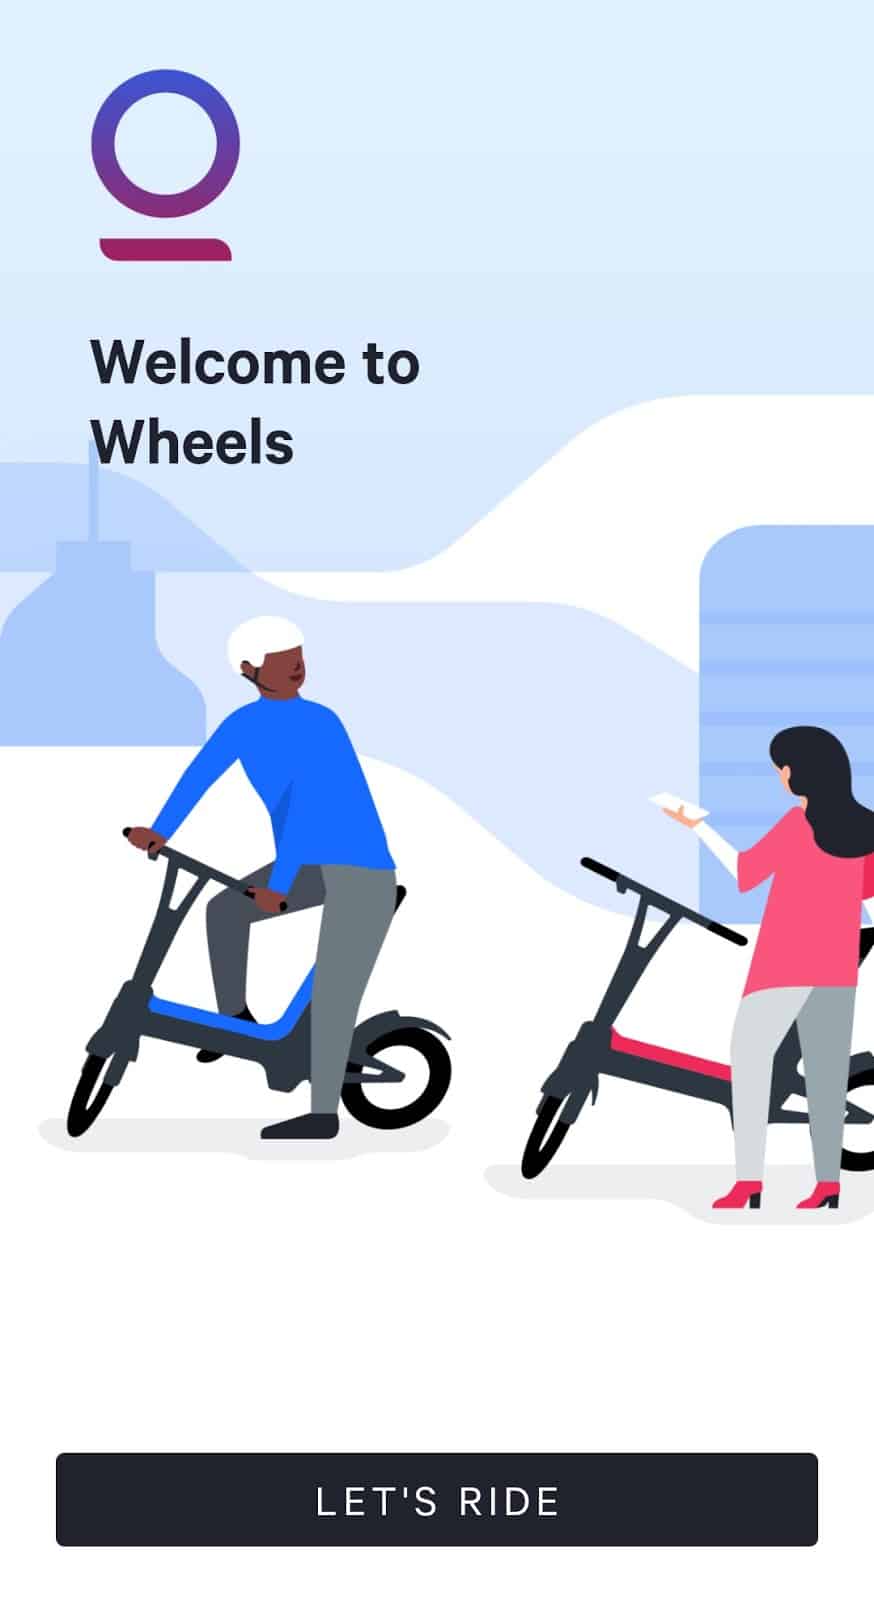 The welcome page of the Wheels Scooter app